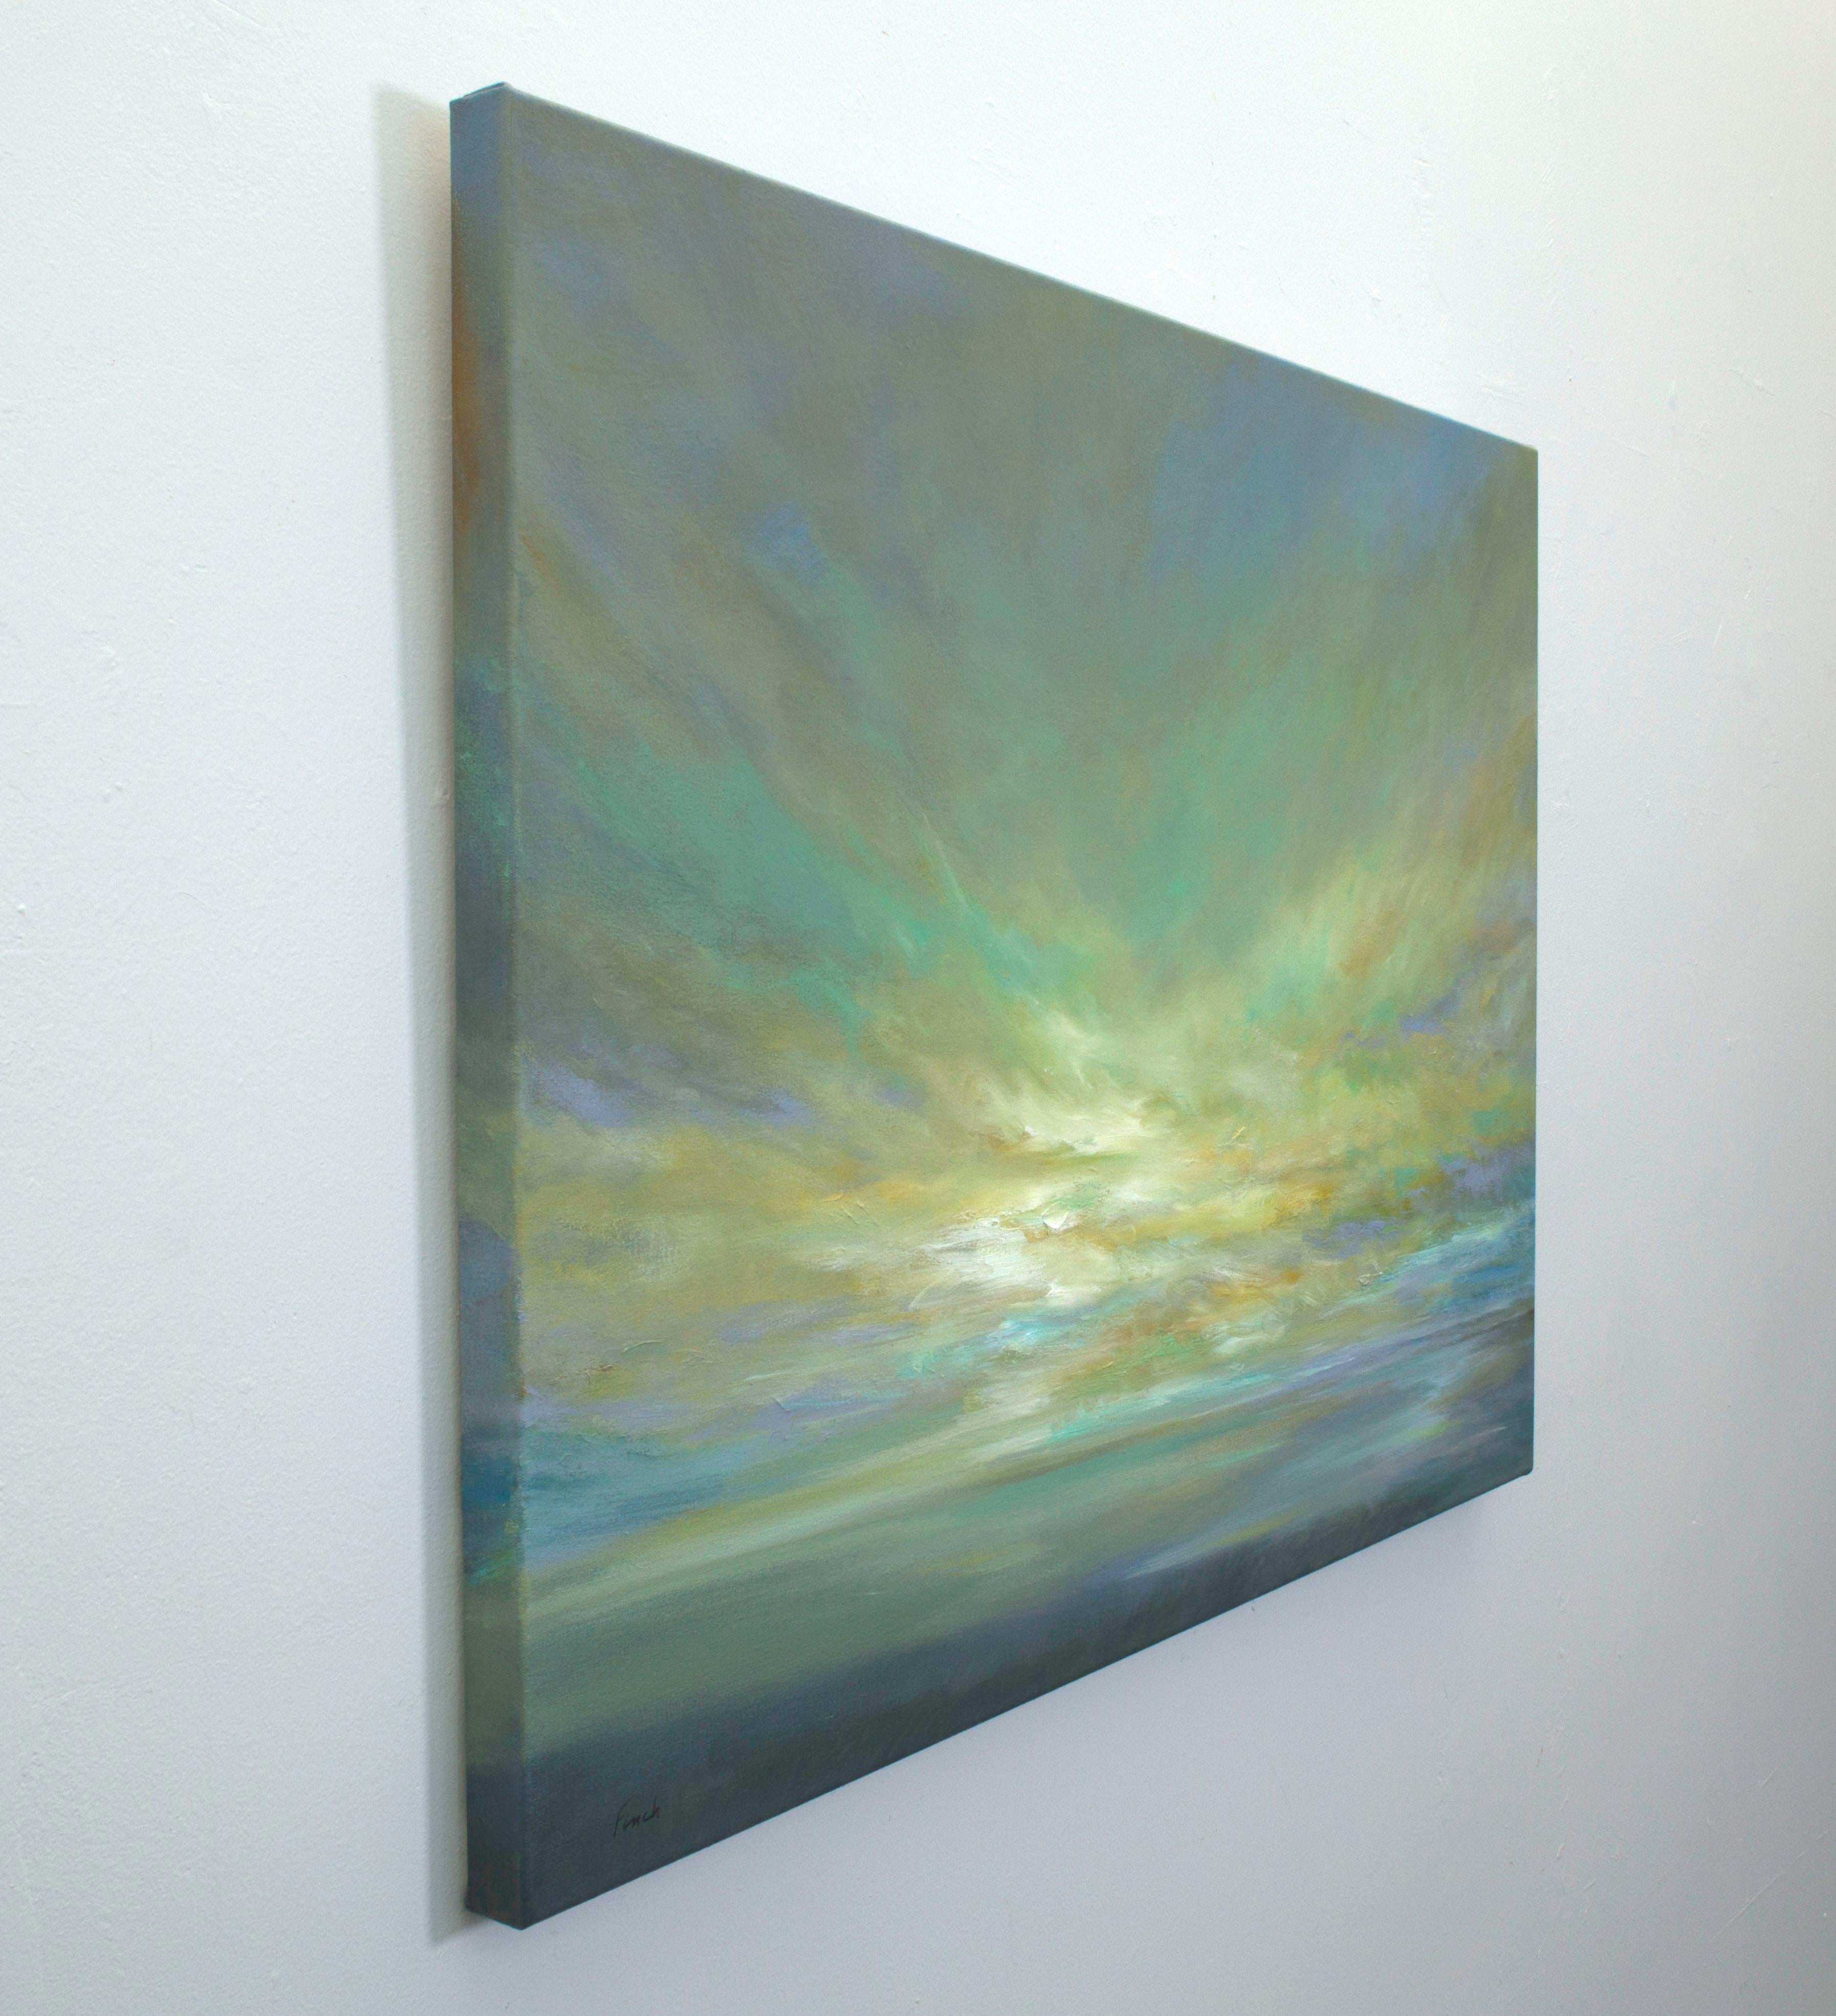 <p>Artist Comments<br /> This painting is based on a storm off the California coast that I saw one spring day while walking my dog along the bluffs just south of Half Moon Bay. I stood in awe as the clouds danced in a kaleidoscope of colors for 40